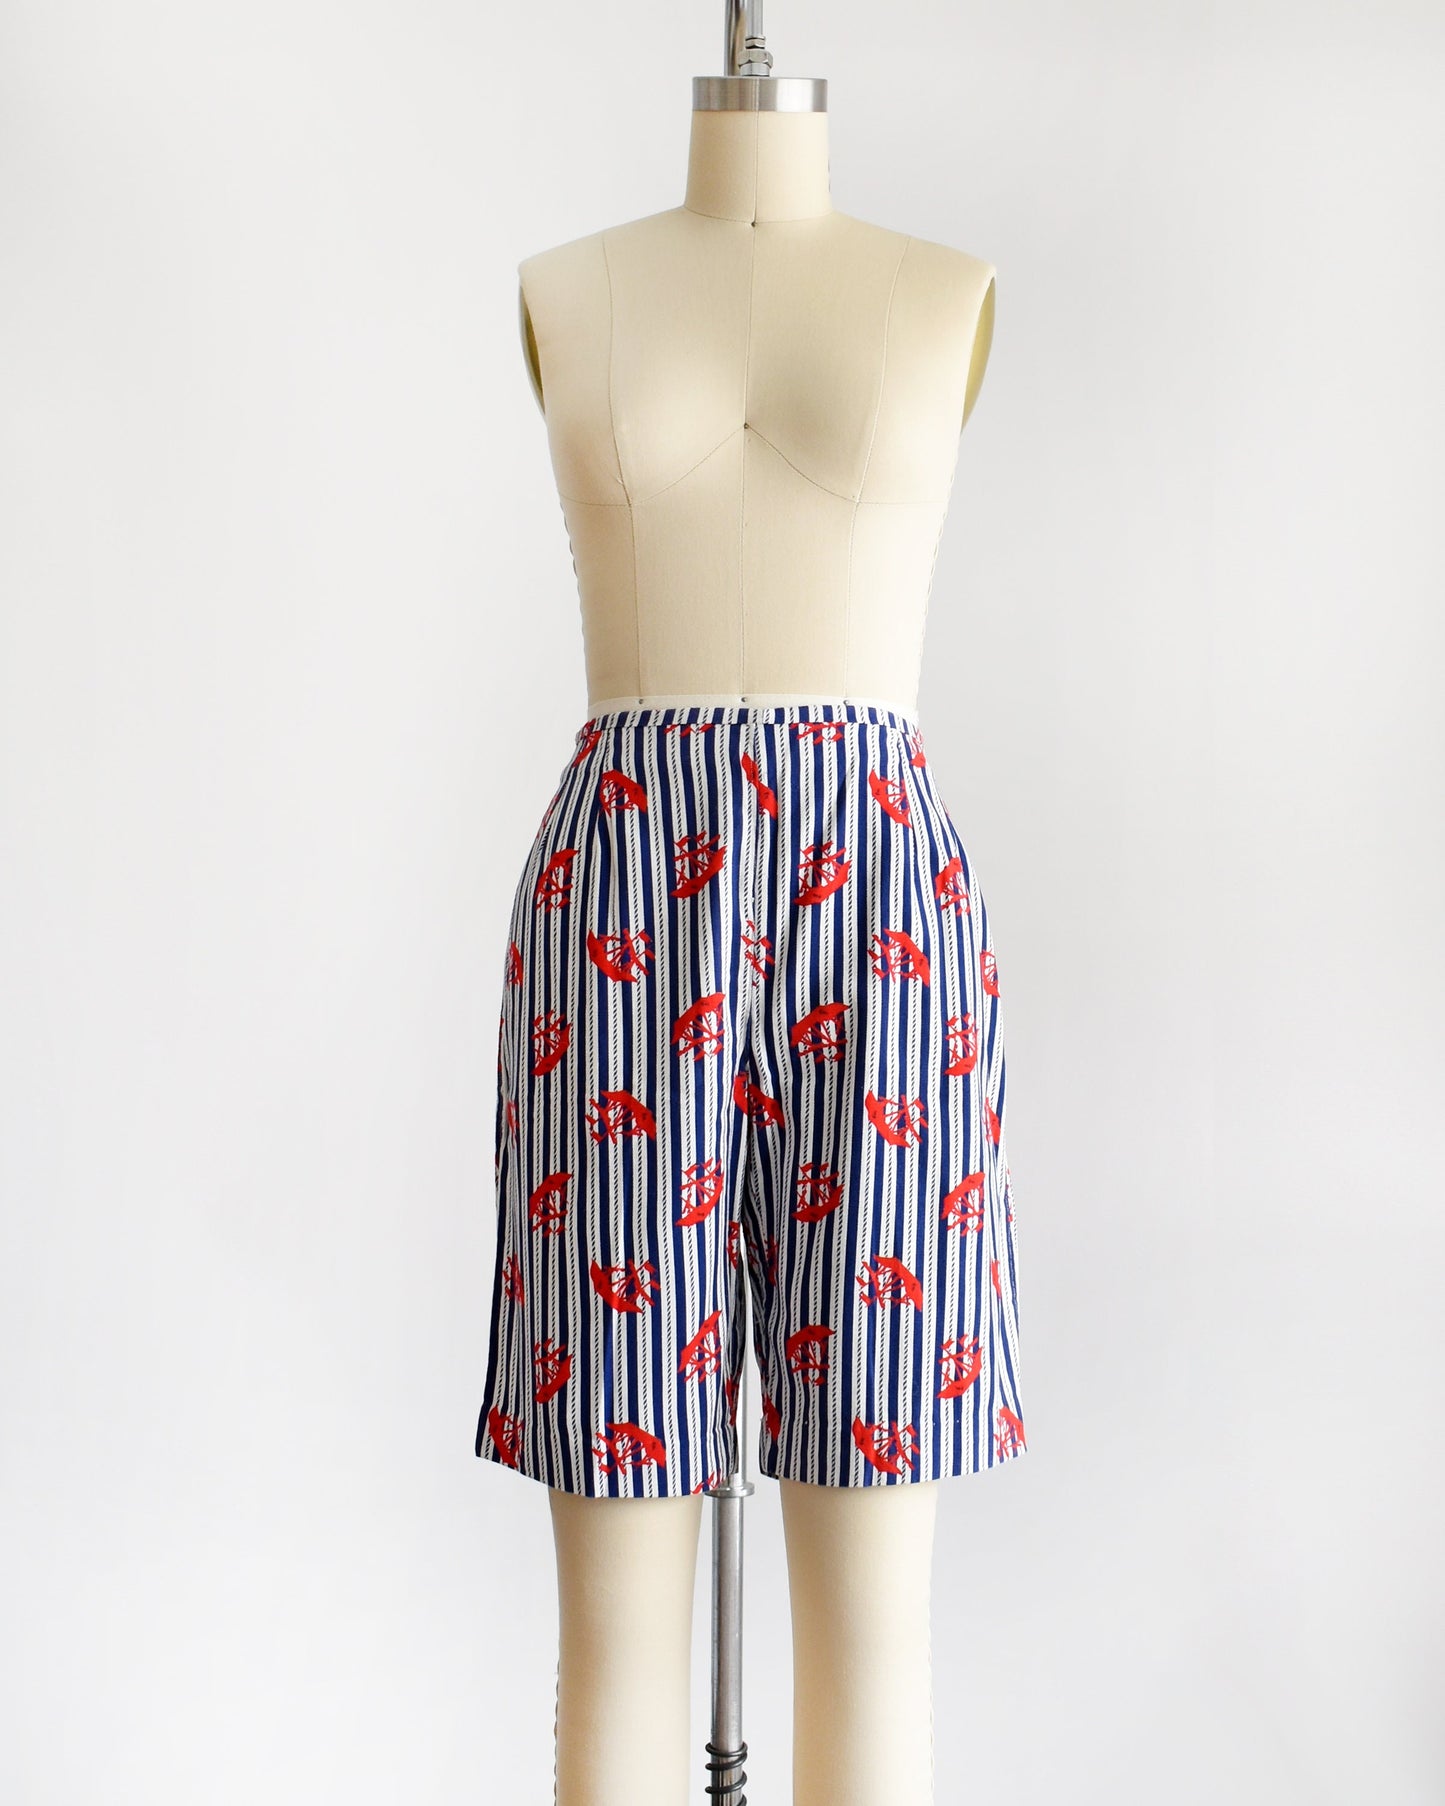 A pair of vintage 60s shorts that are navy blue and white vertical striped with a red clipper ship print. The shorts are modeled on a dress form. The shorts are cuffed in this photo.